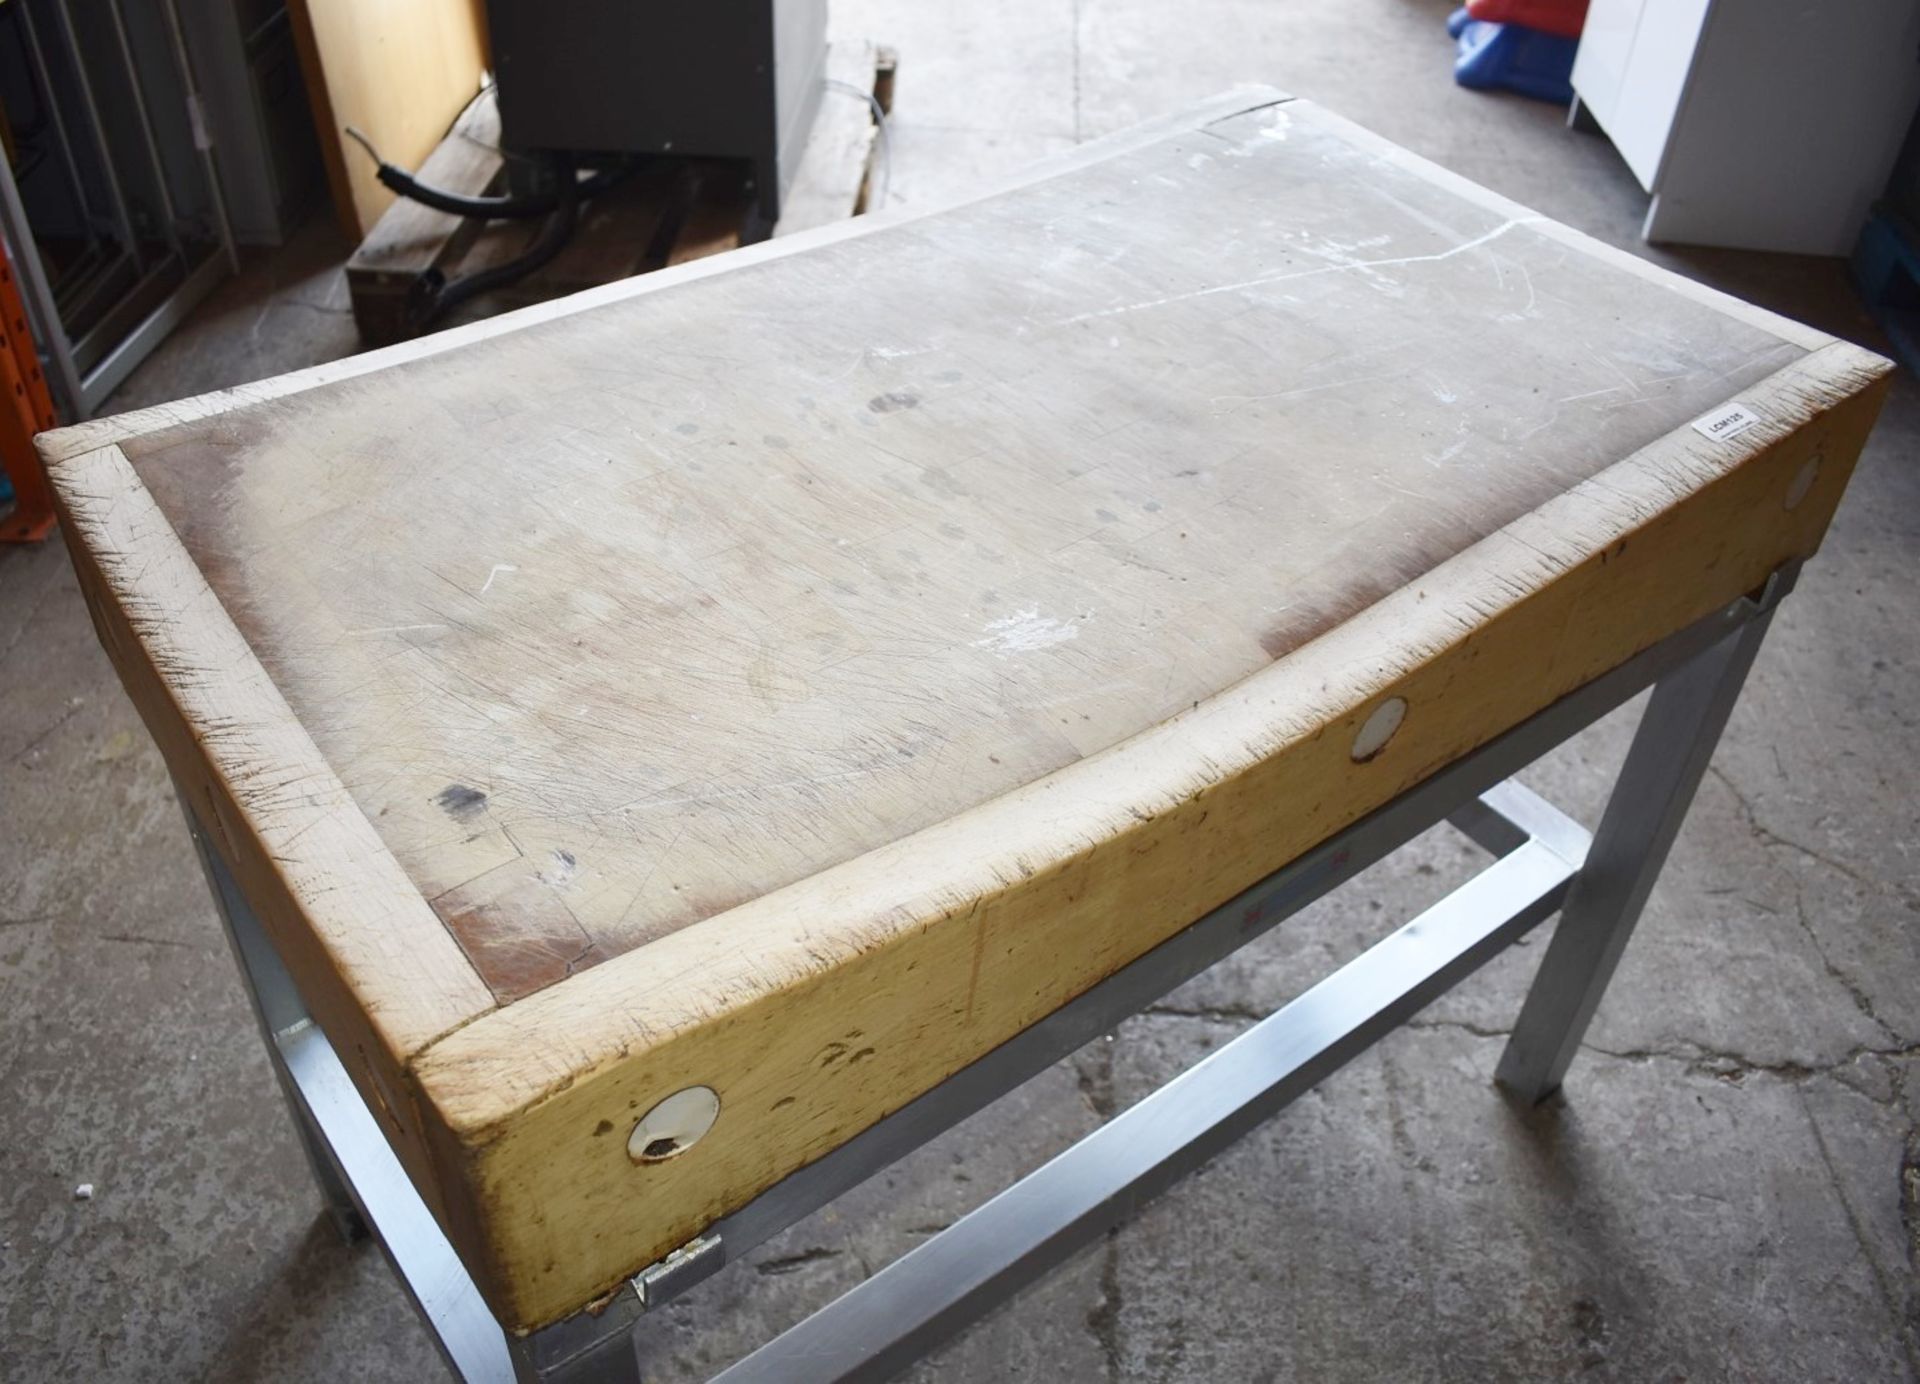 1 x Large Butchers Block Chopping Board on Fabricated Stainless Steel Stand Dimensions: H82 x W107 x - Image 5 of 12